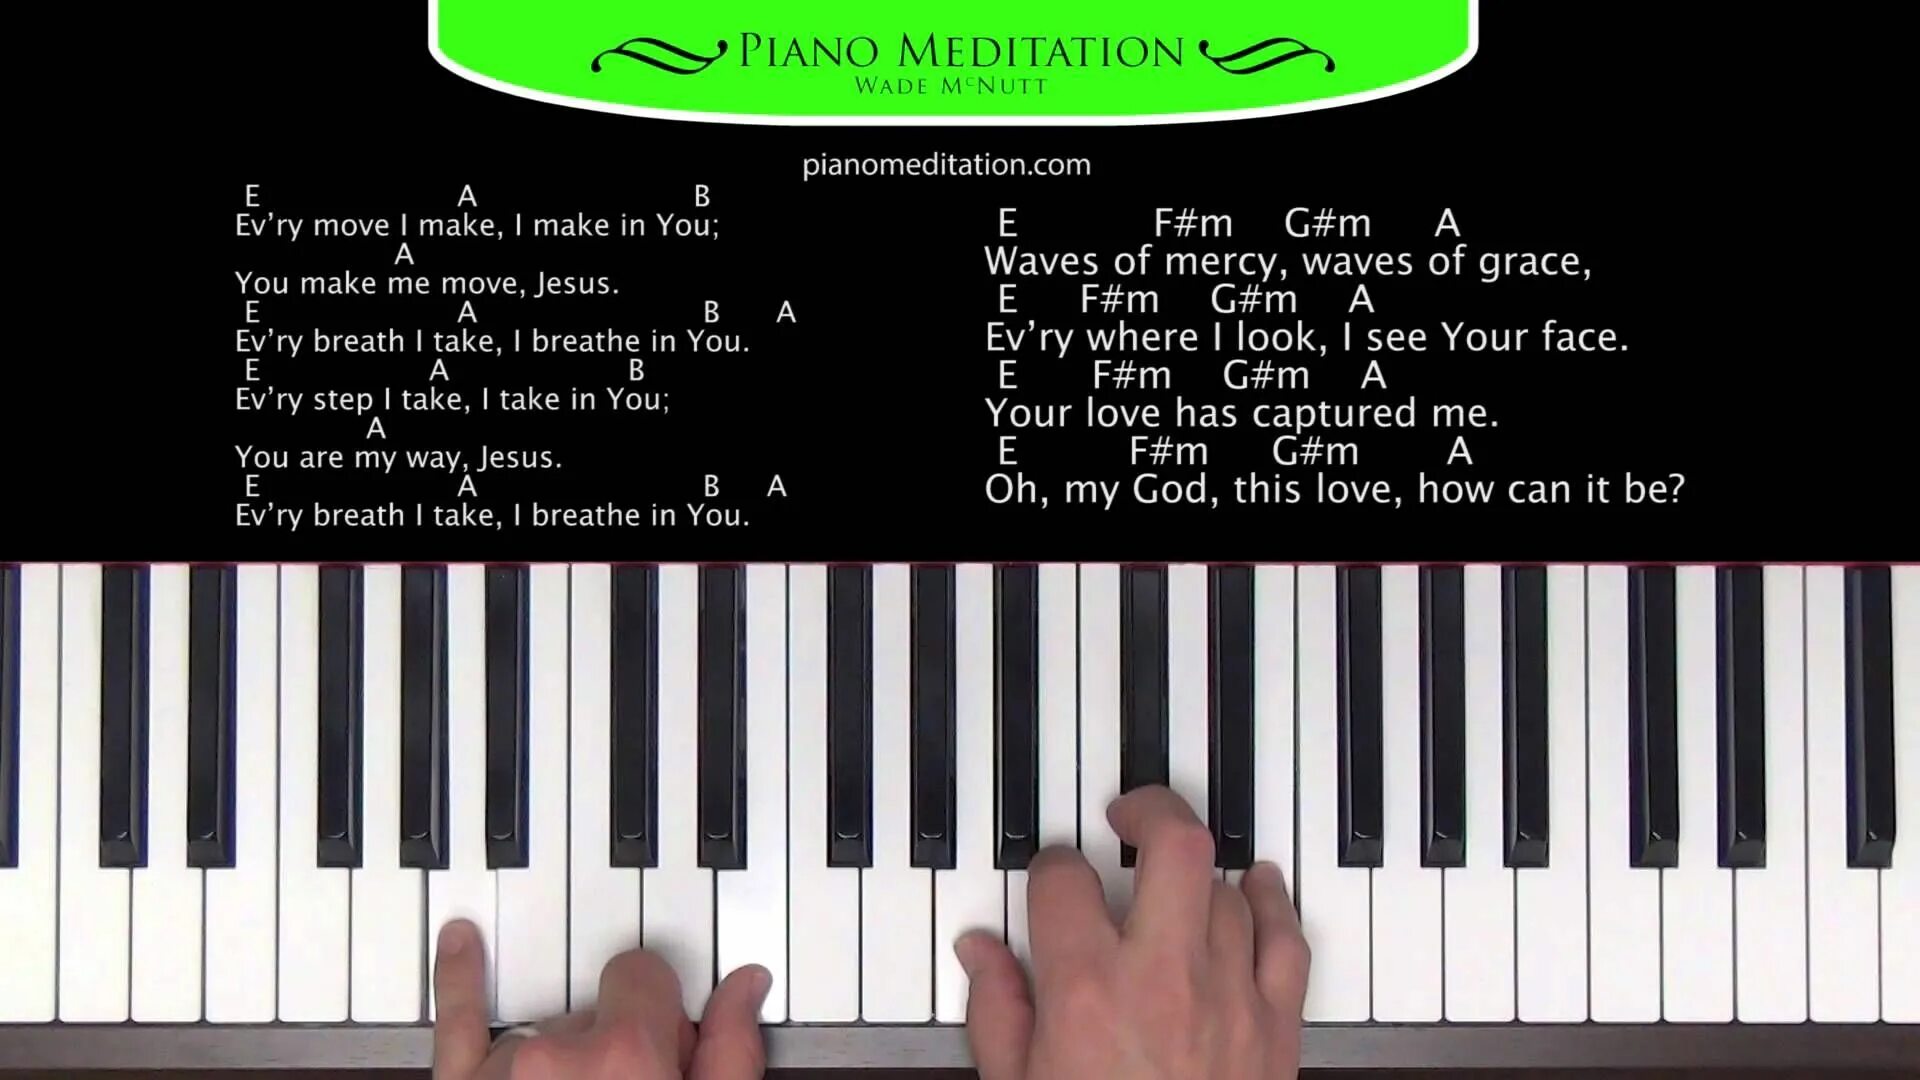 E на пианино. Imagine Piano Chords. To Play the Piano. Can you feel my Heart на пианино по клавишам. I can playing the piano